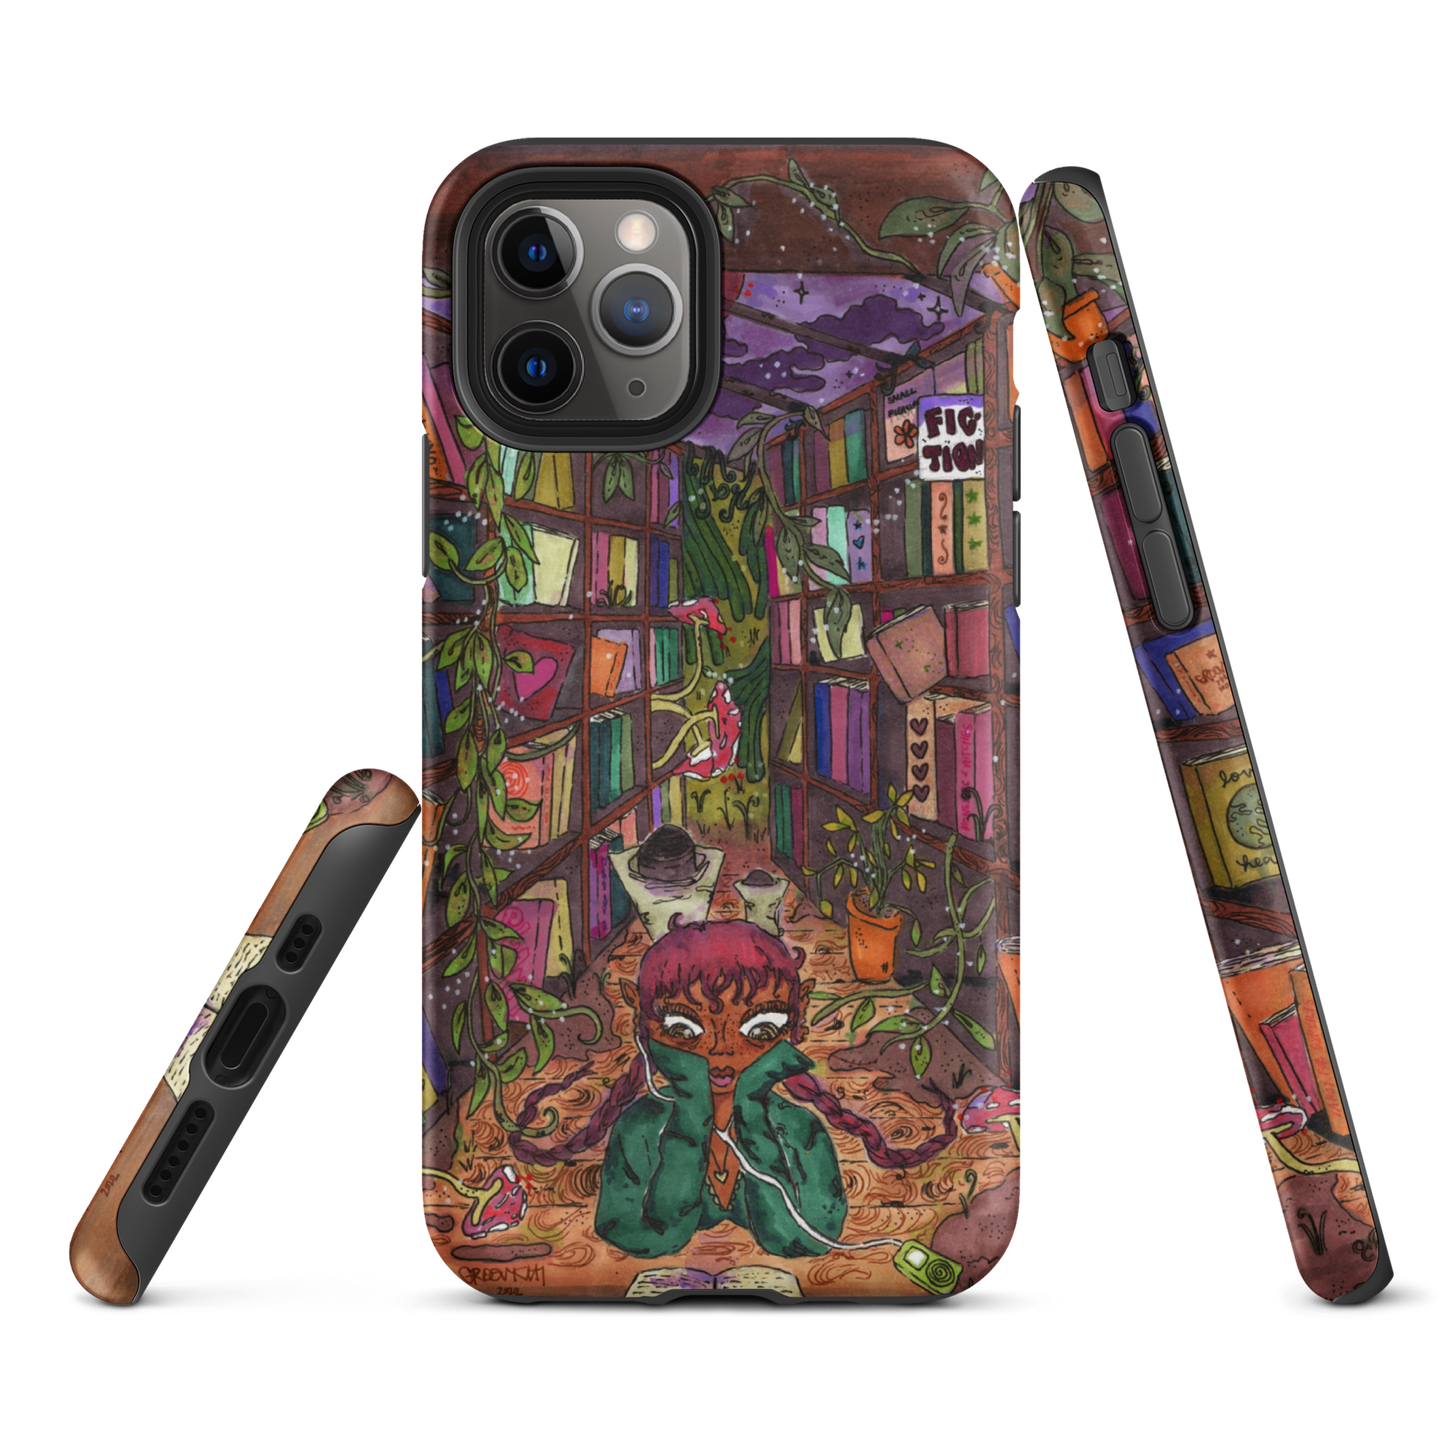 "if you have a garden and a library" fullcover iphone case